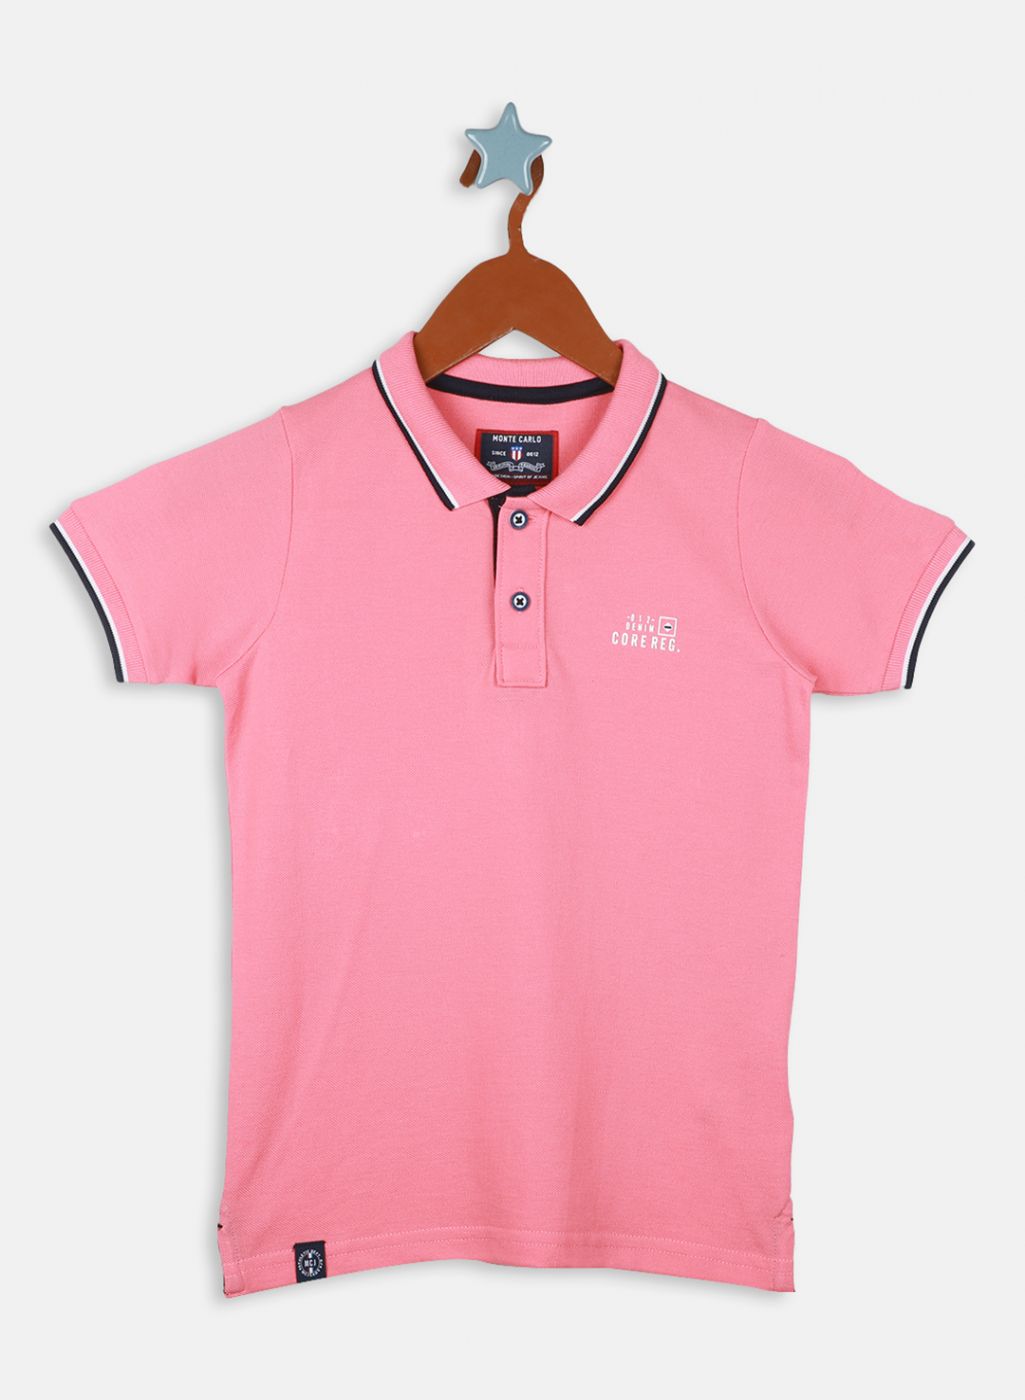 Buy Kids Pink T shirt For Boys and Girls Online in India